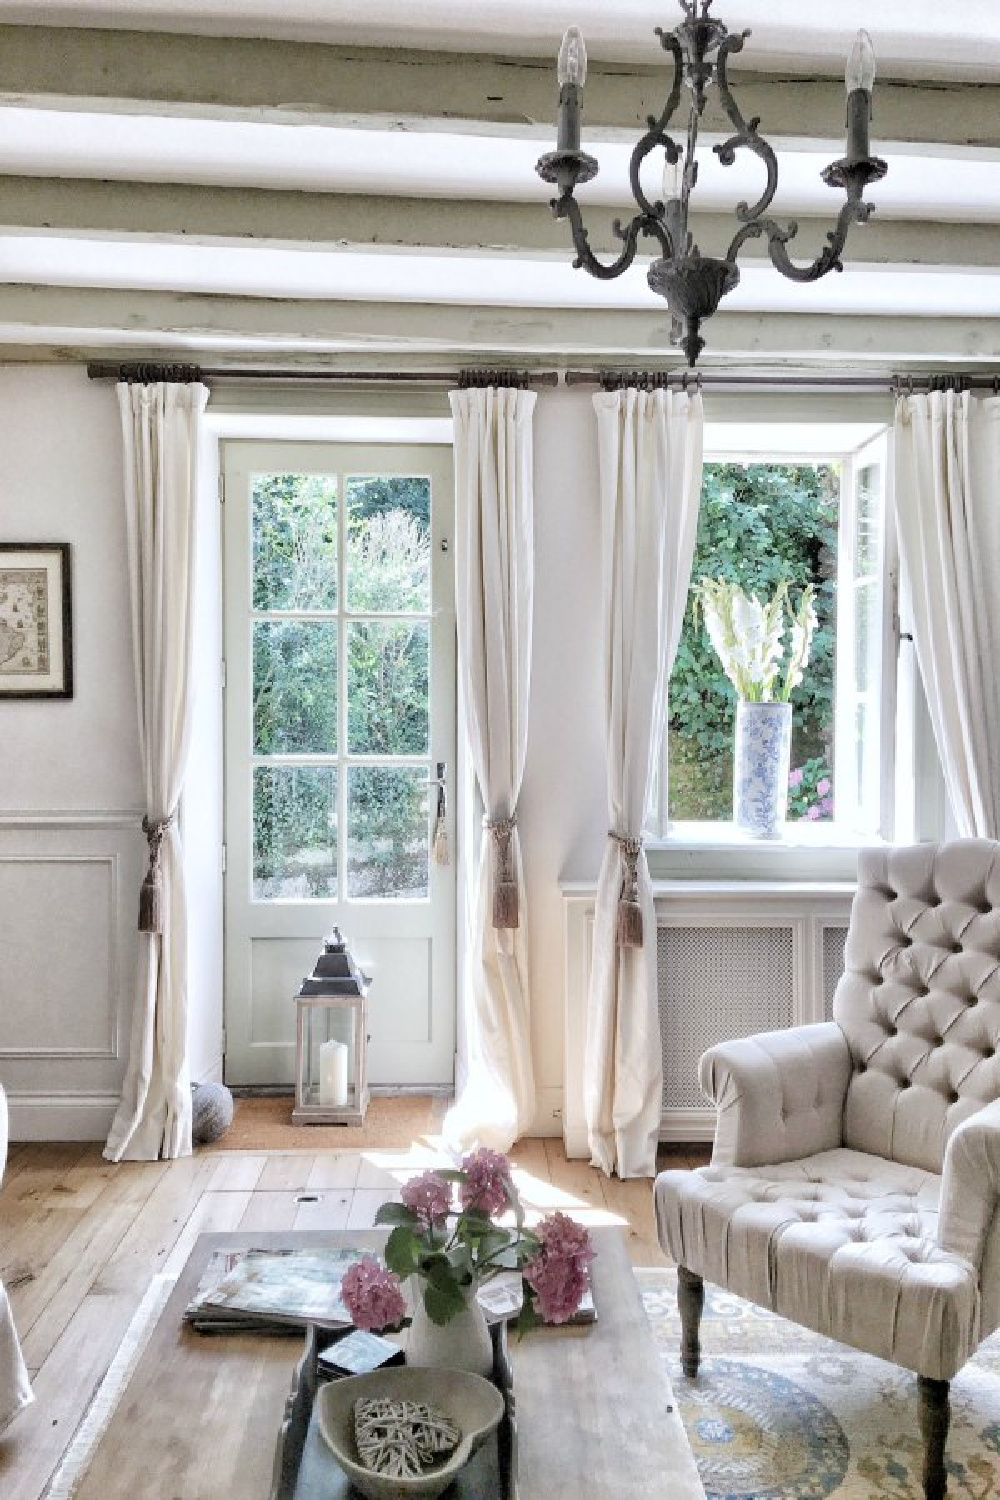 Breezy and unfussy with Belgian linen curtains from Pottery Barn, this French farmhouse living room with white (Farrow and Ball's Strong White) and French Gray accents is as timeless as it is refreshing - Vivi et Margot.